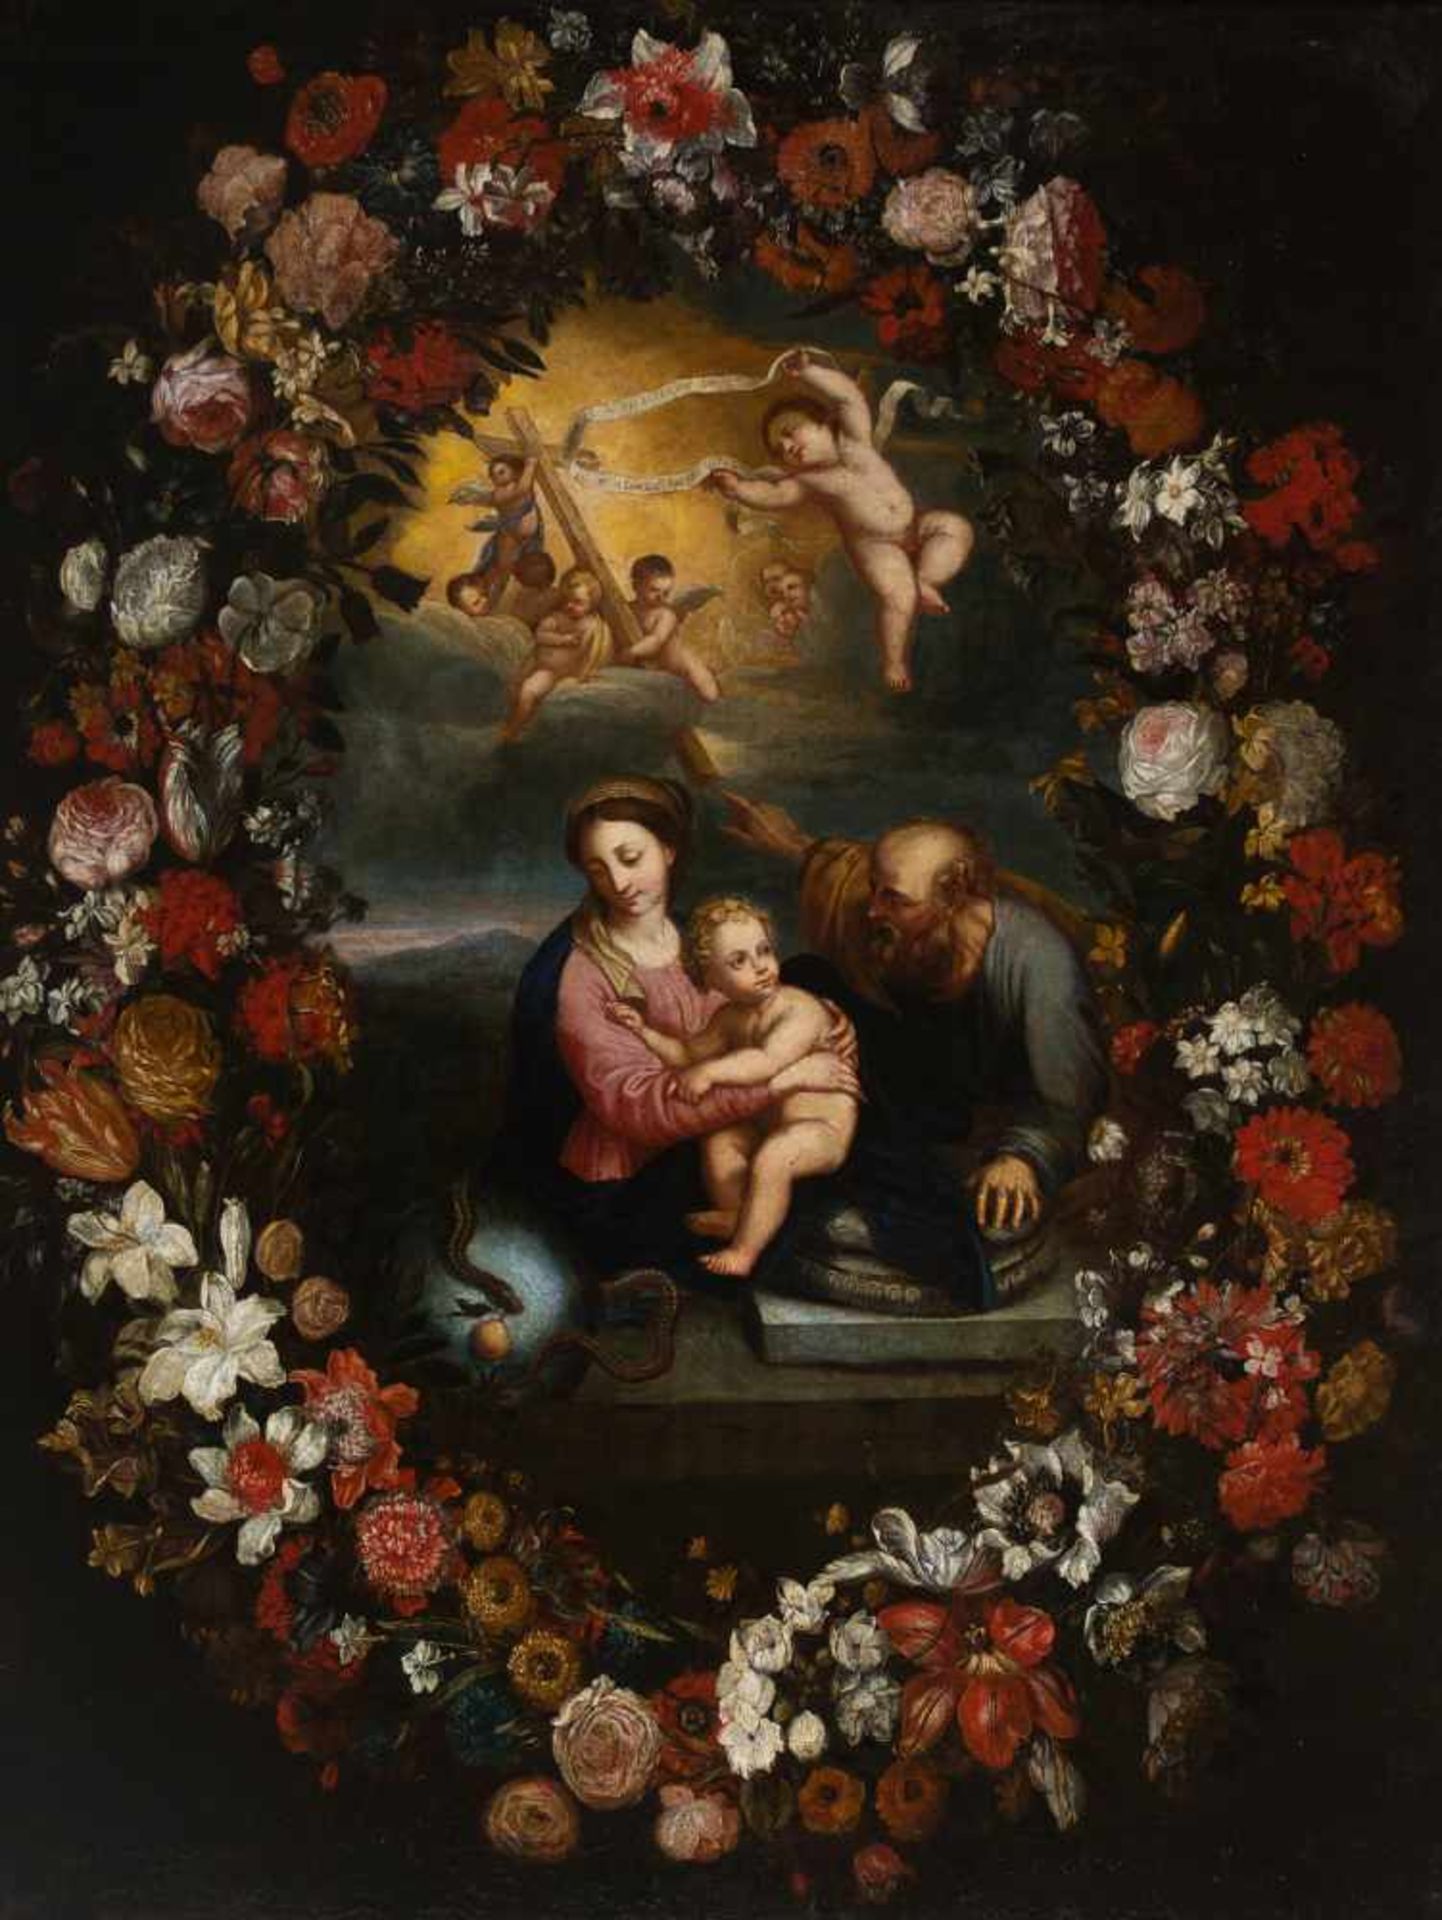 17th century French School. "Holy Family with a border of flowers" Oil on canvas 130 x 99 cm.